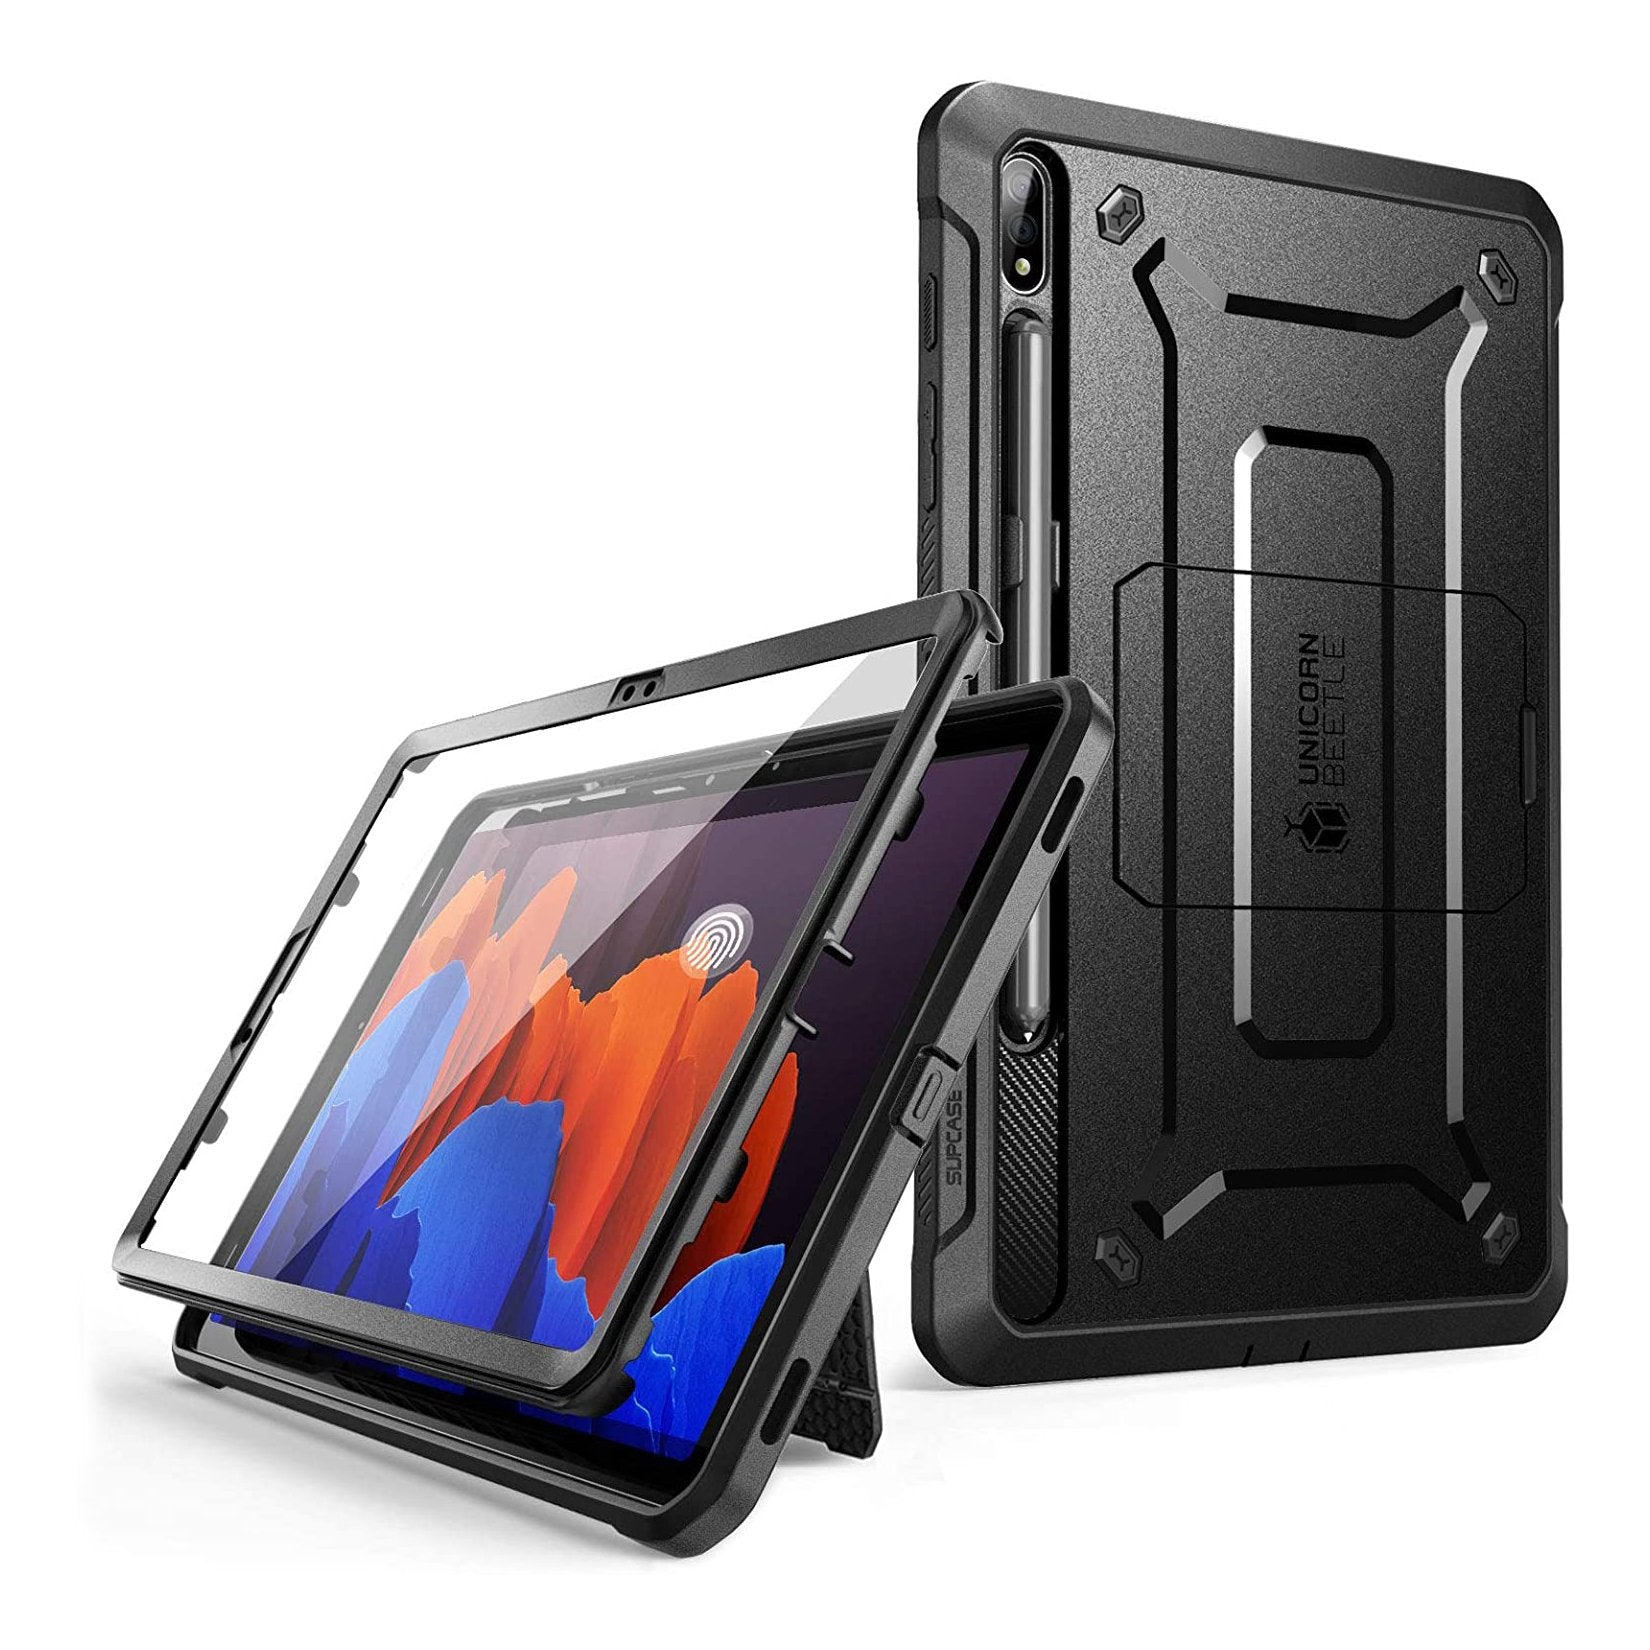 SUPCASE Galaxy Tab S7 / S7 Plus (2020) Unicorn Beetle Pro Rugged Case with S Pen Holder - Black